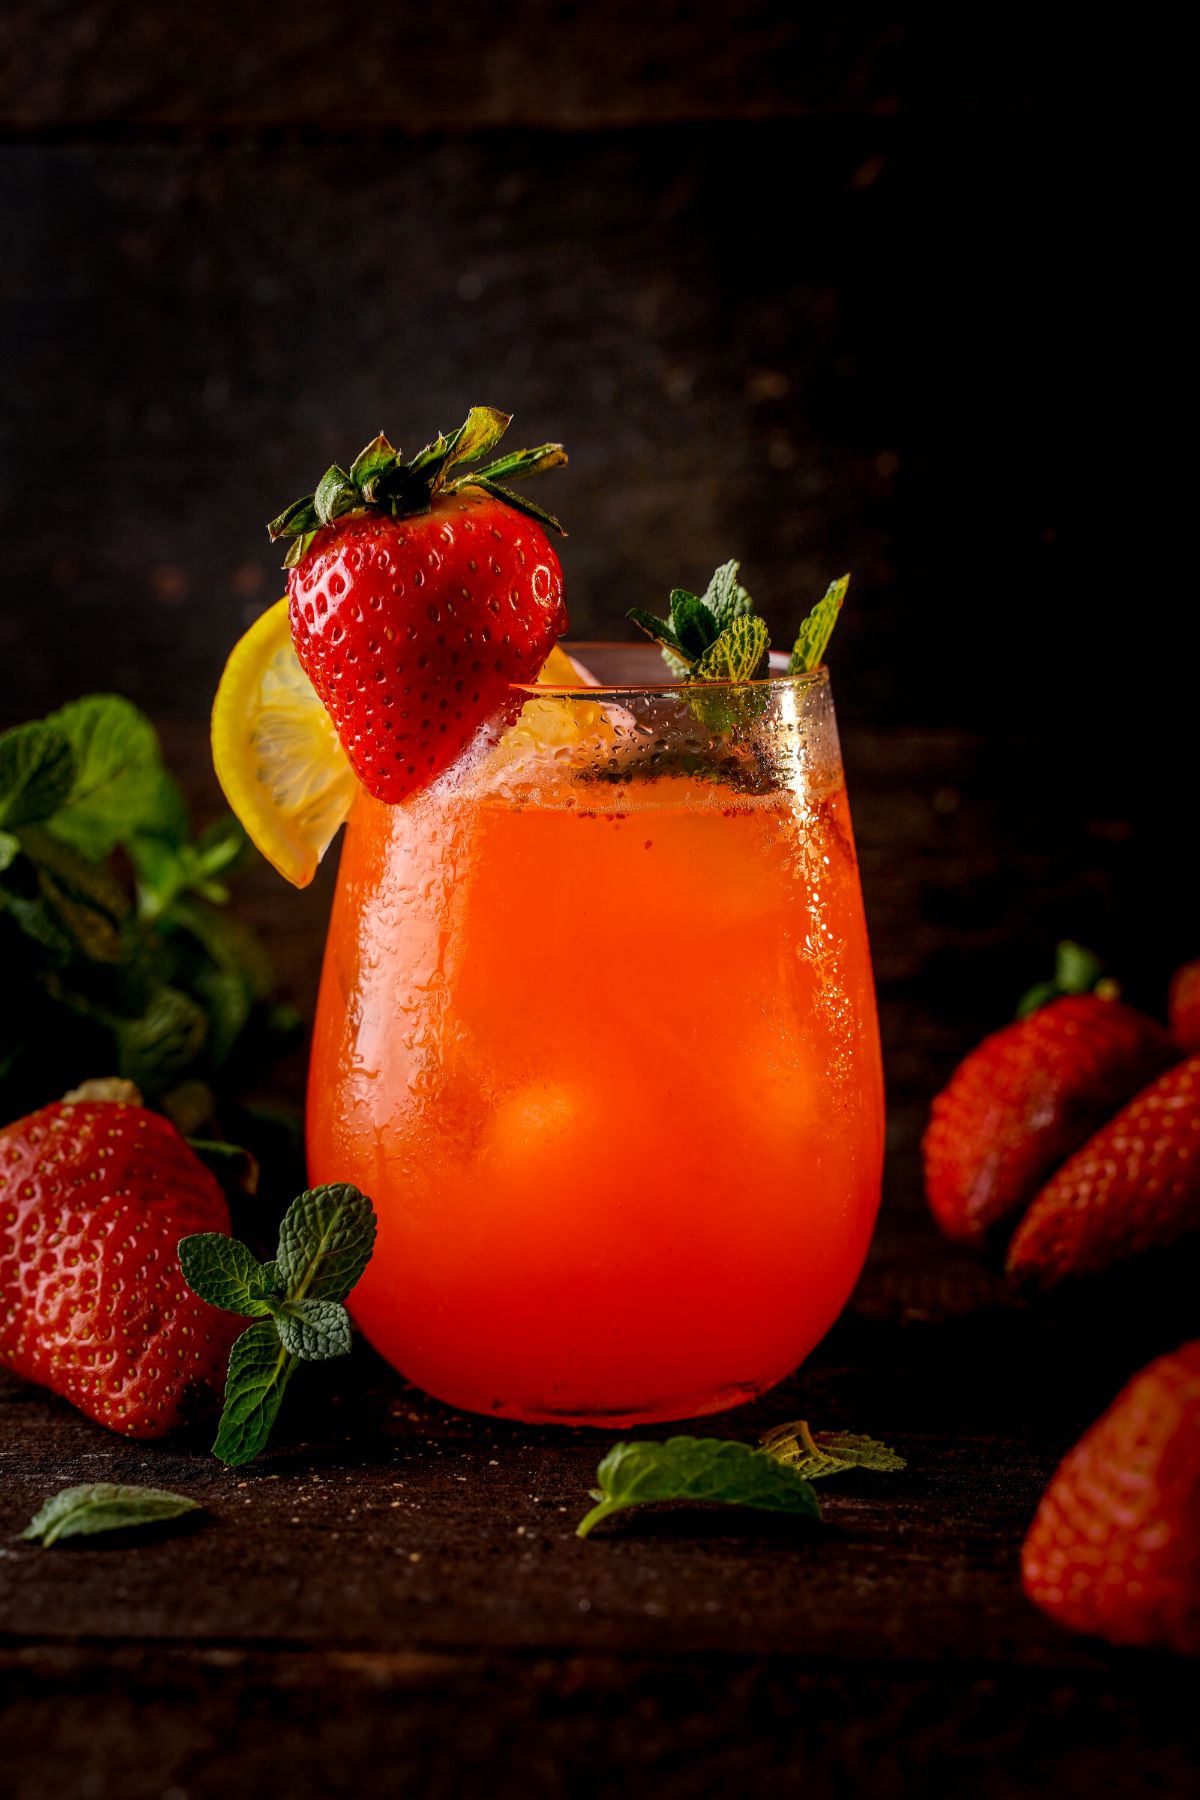 Strawberry lemonade in a glass cup with slice of lemon and strawberry.